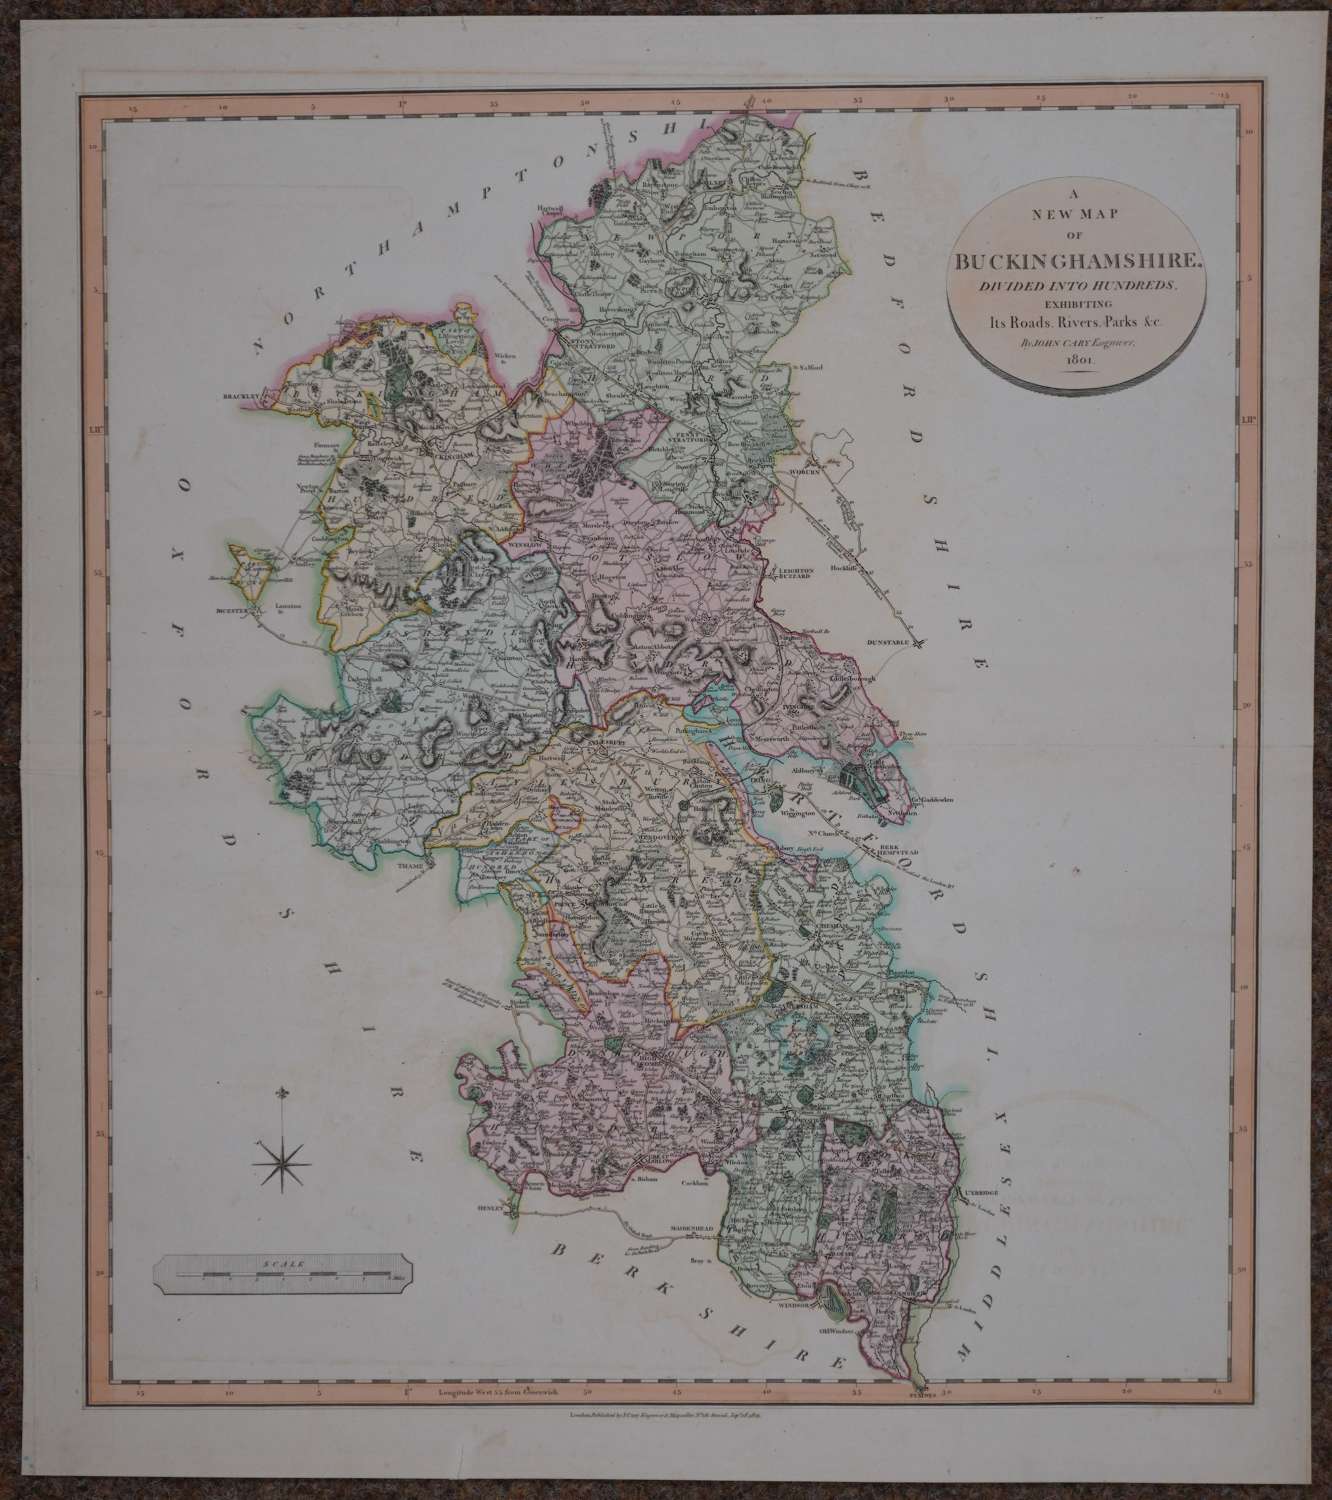 A New Map of Buckinghamshire by John Cary